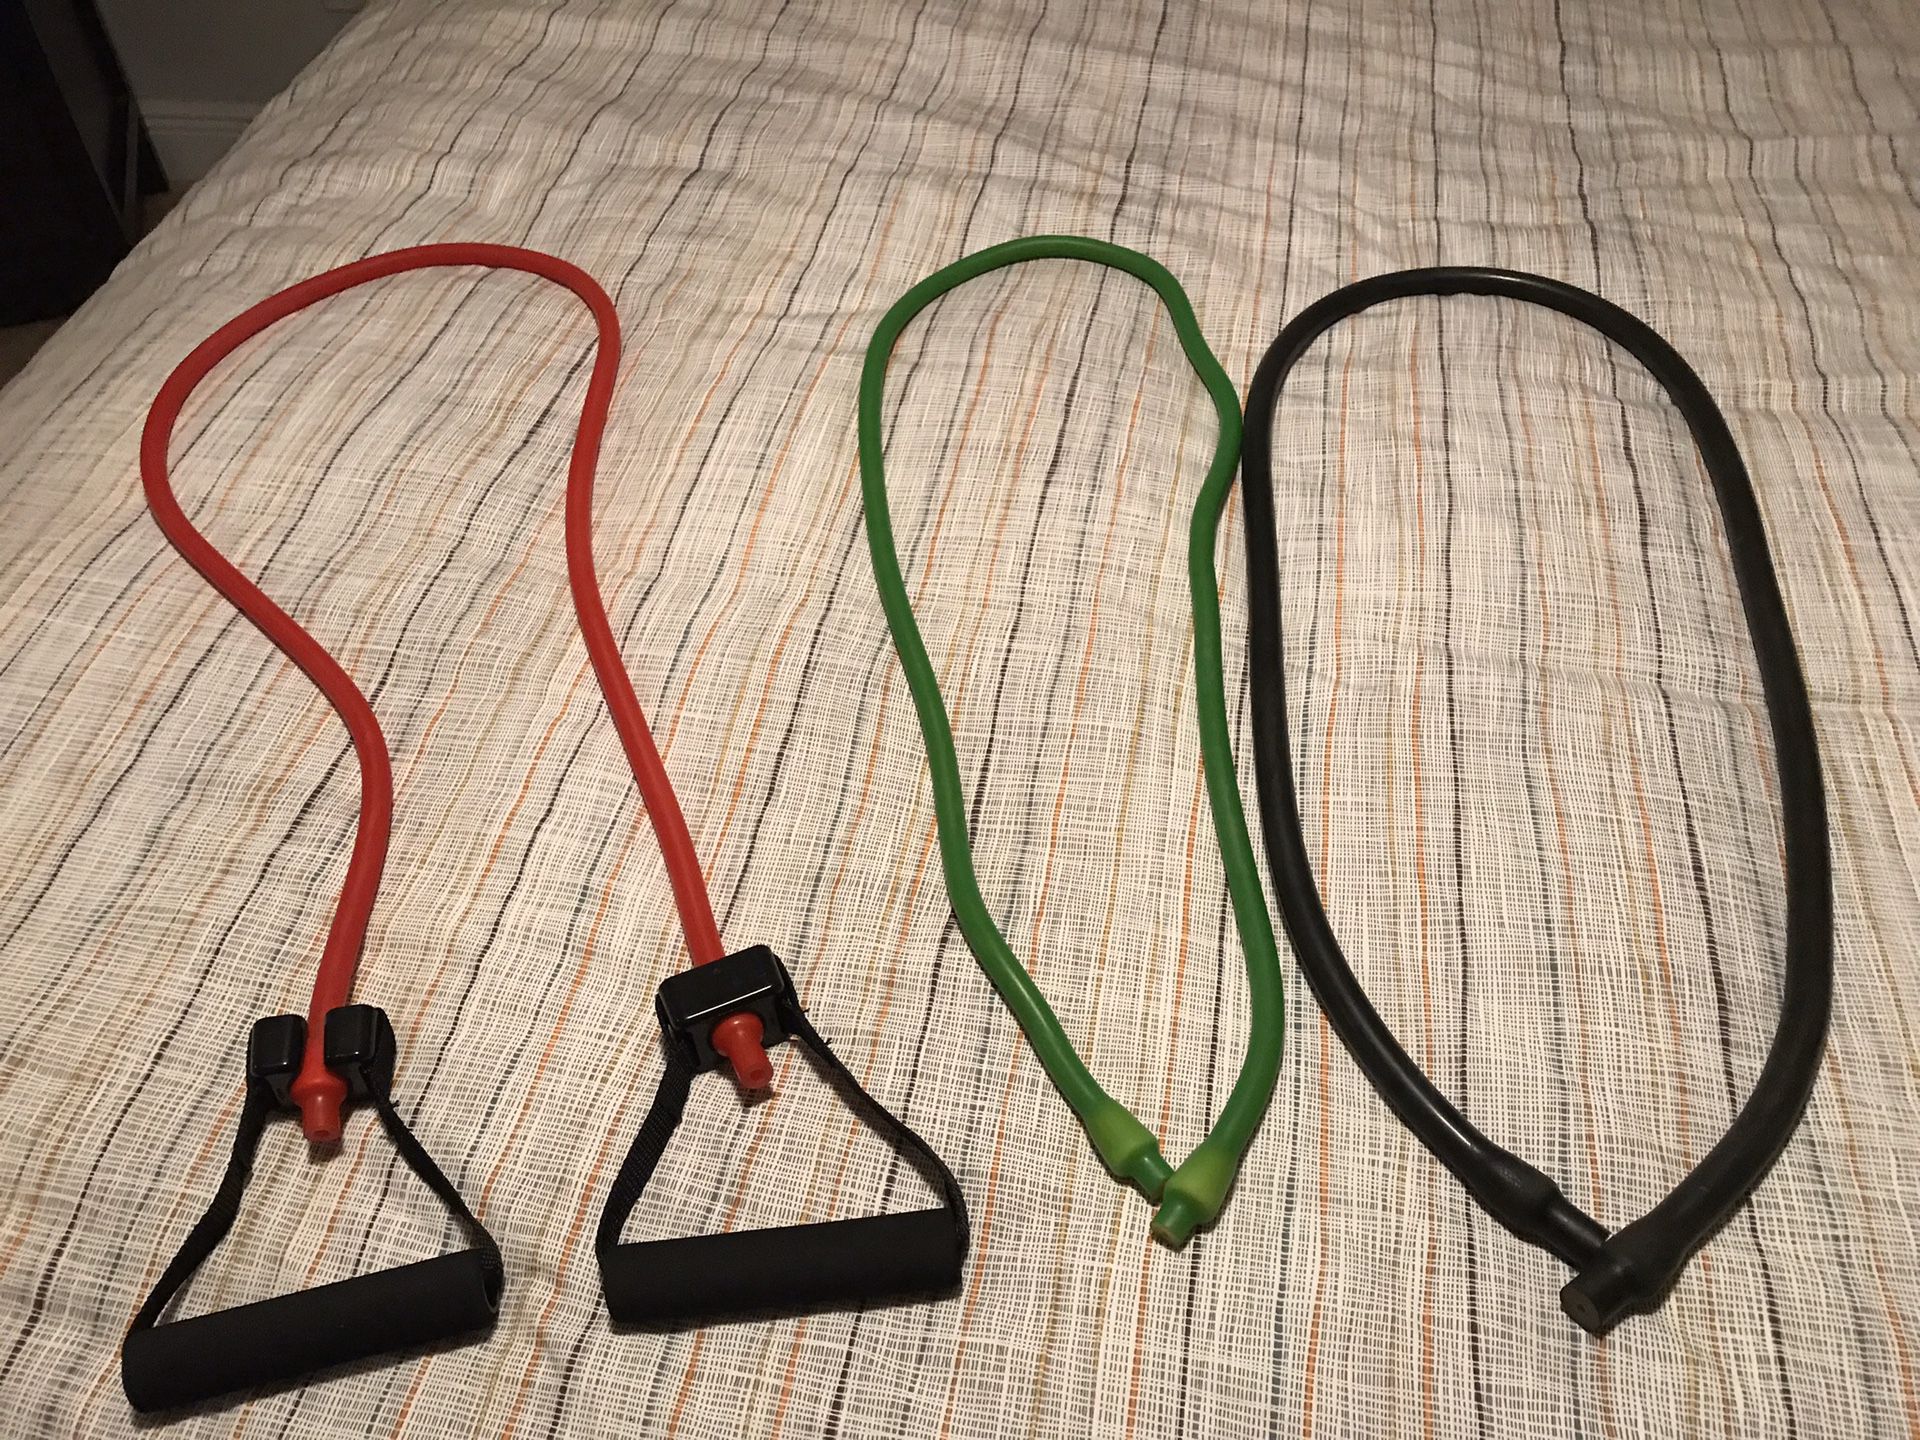 P90x exercise DVD, resistance bands, guides